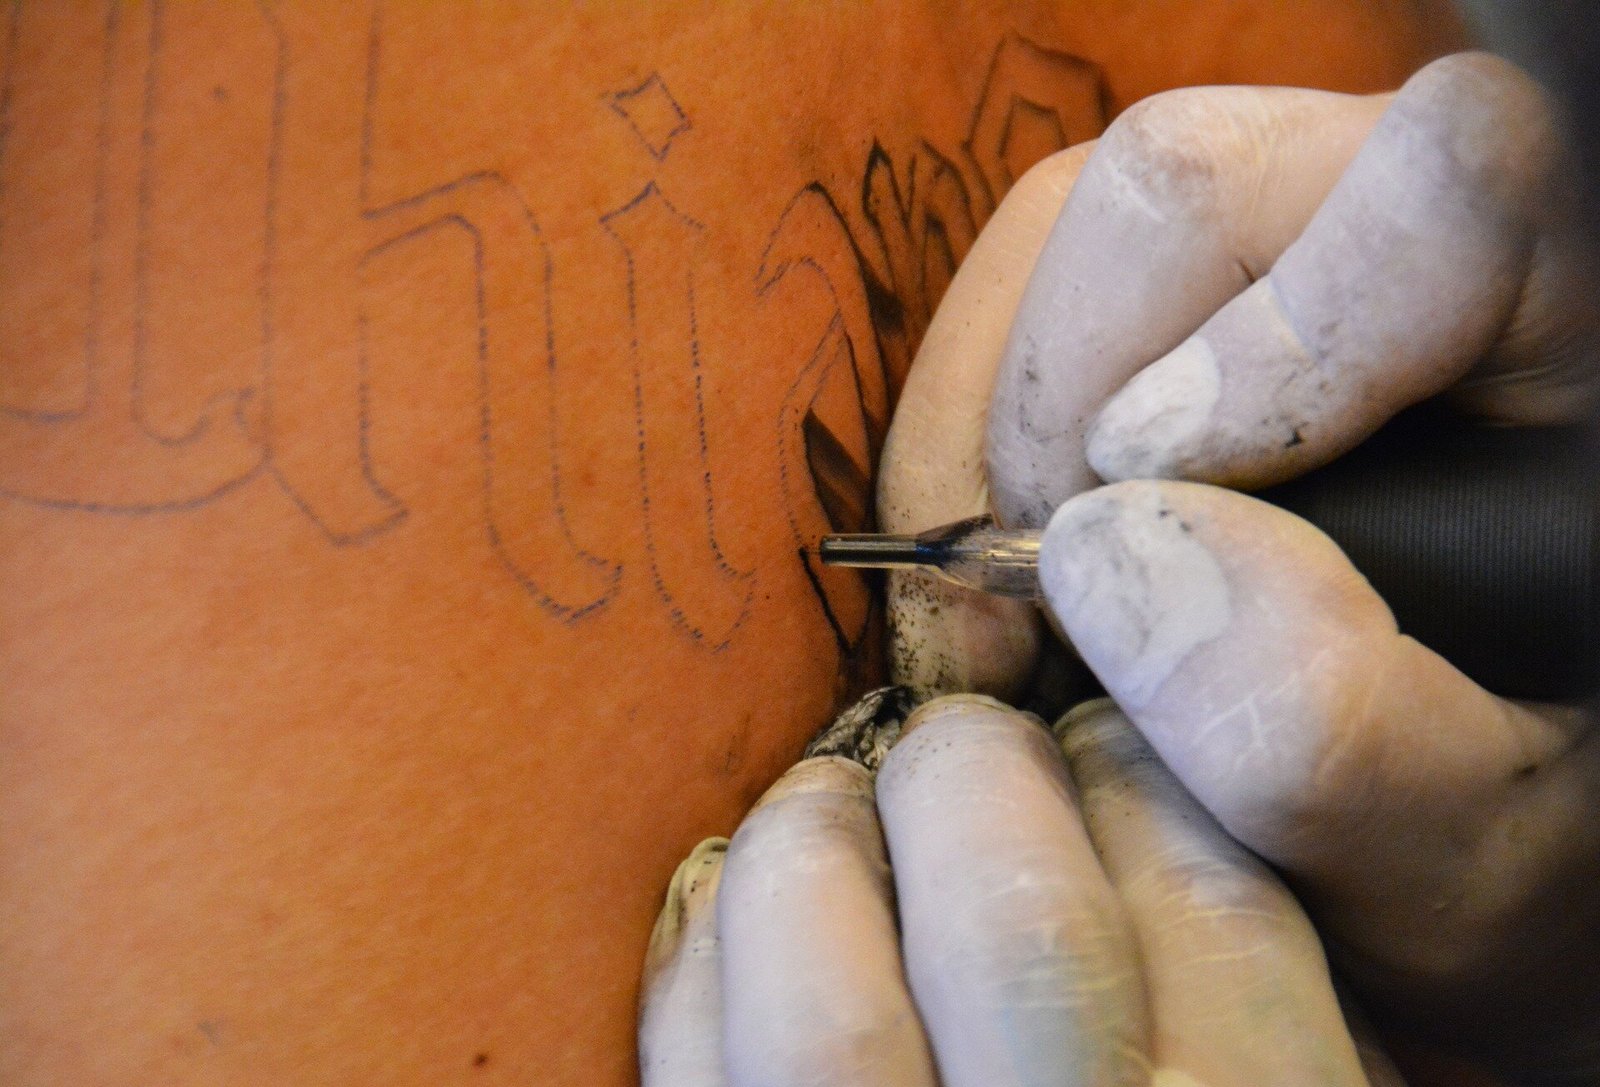 What’s in tattoo ink? My team’s chemical analysis found ingredients that aren’t on the label and could cause allergies